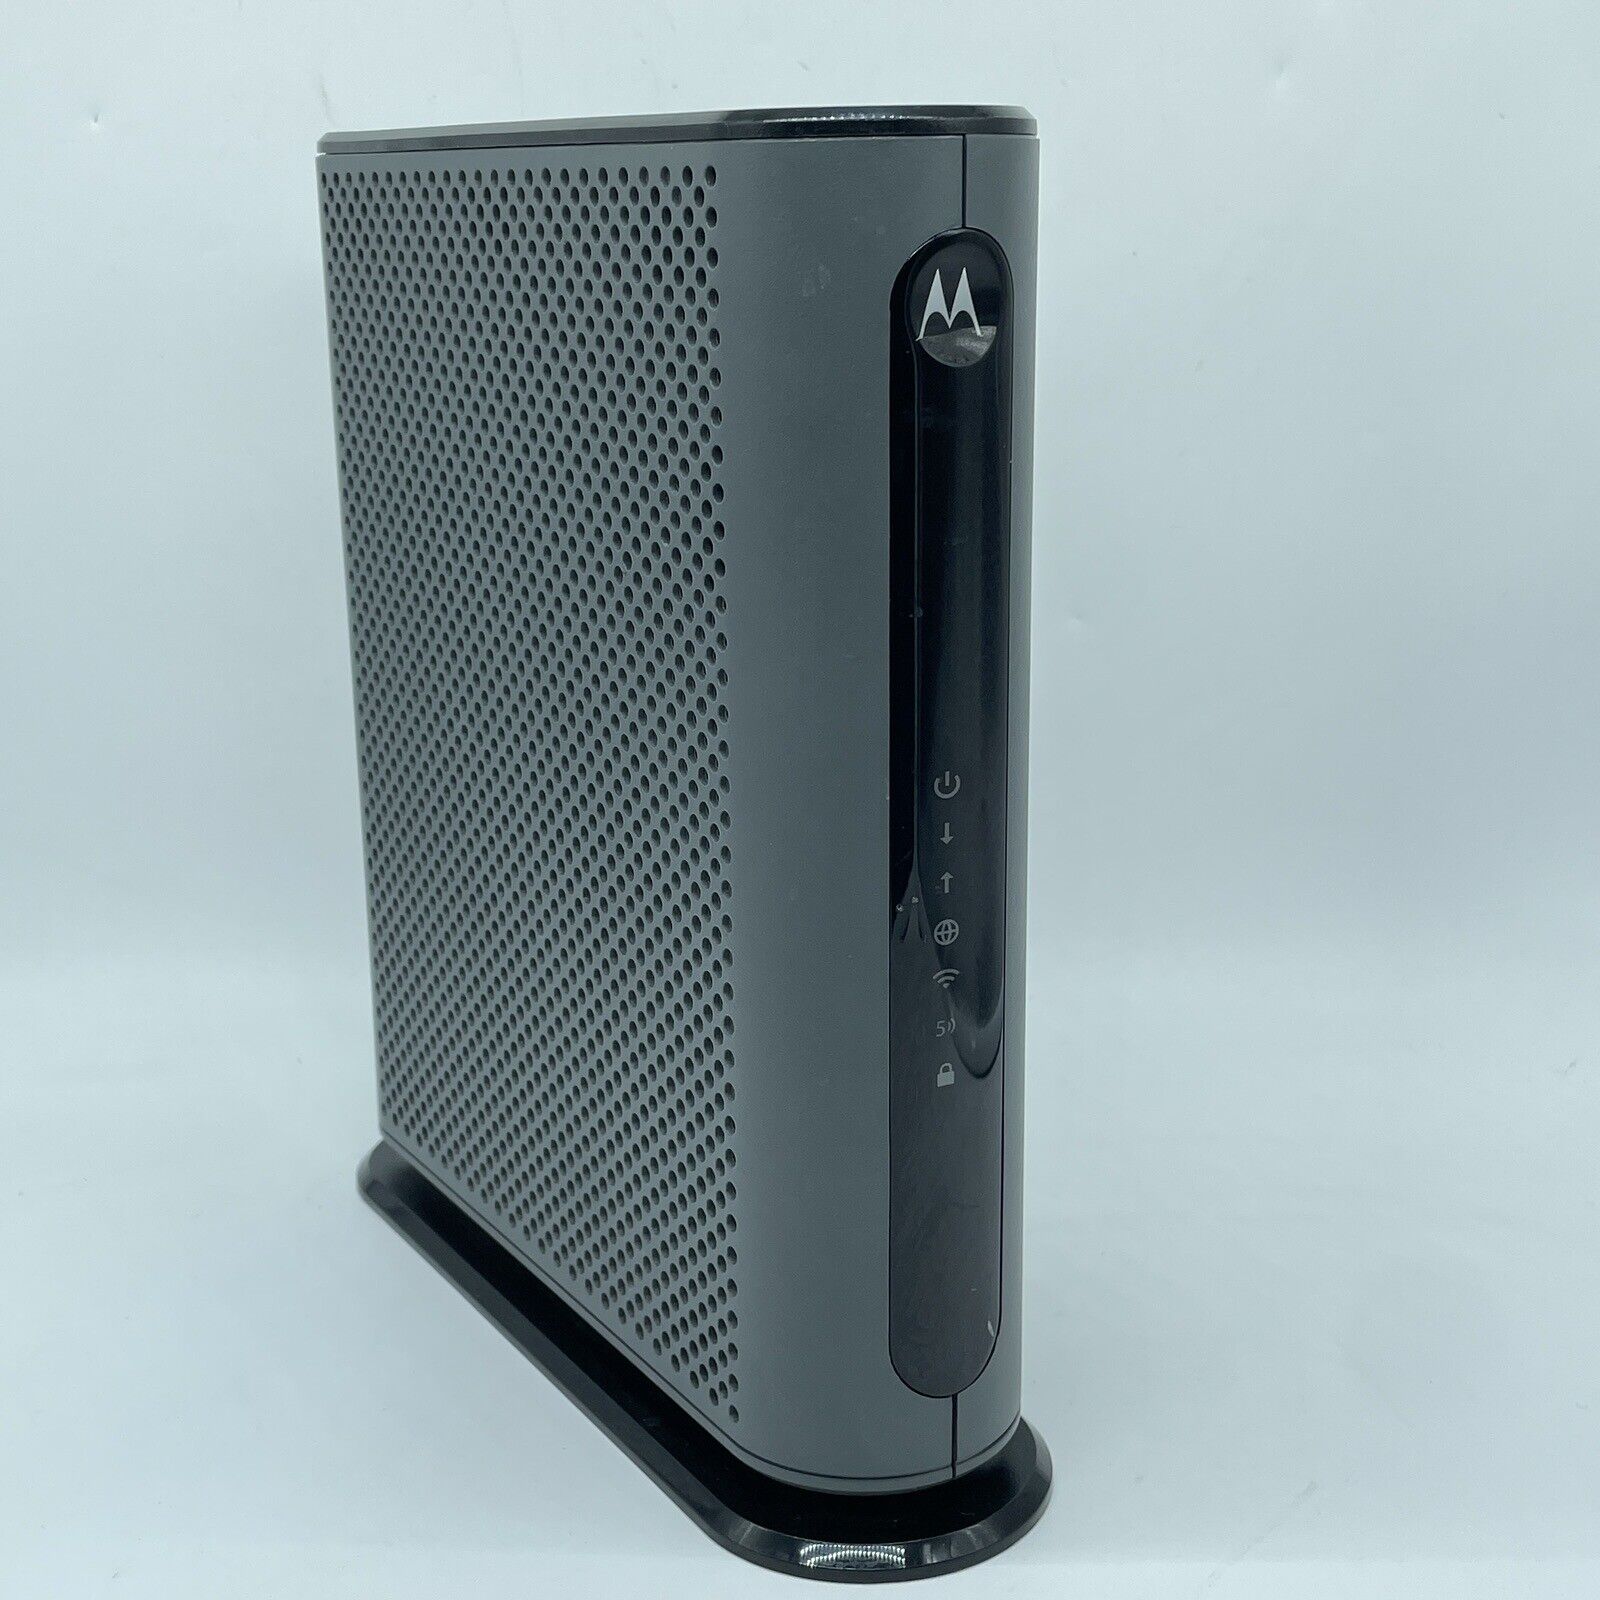 Motorola MG7550 16X4 Cable Modem & AC1900 WiFi Router Combo Dual Band